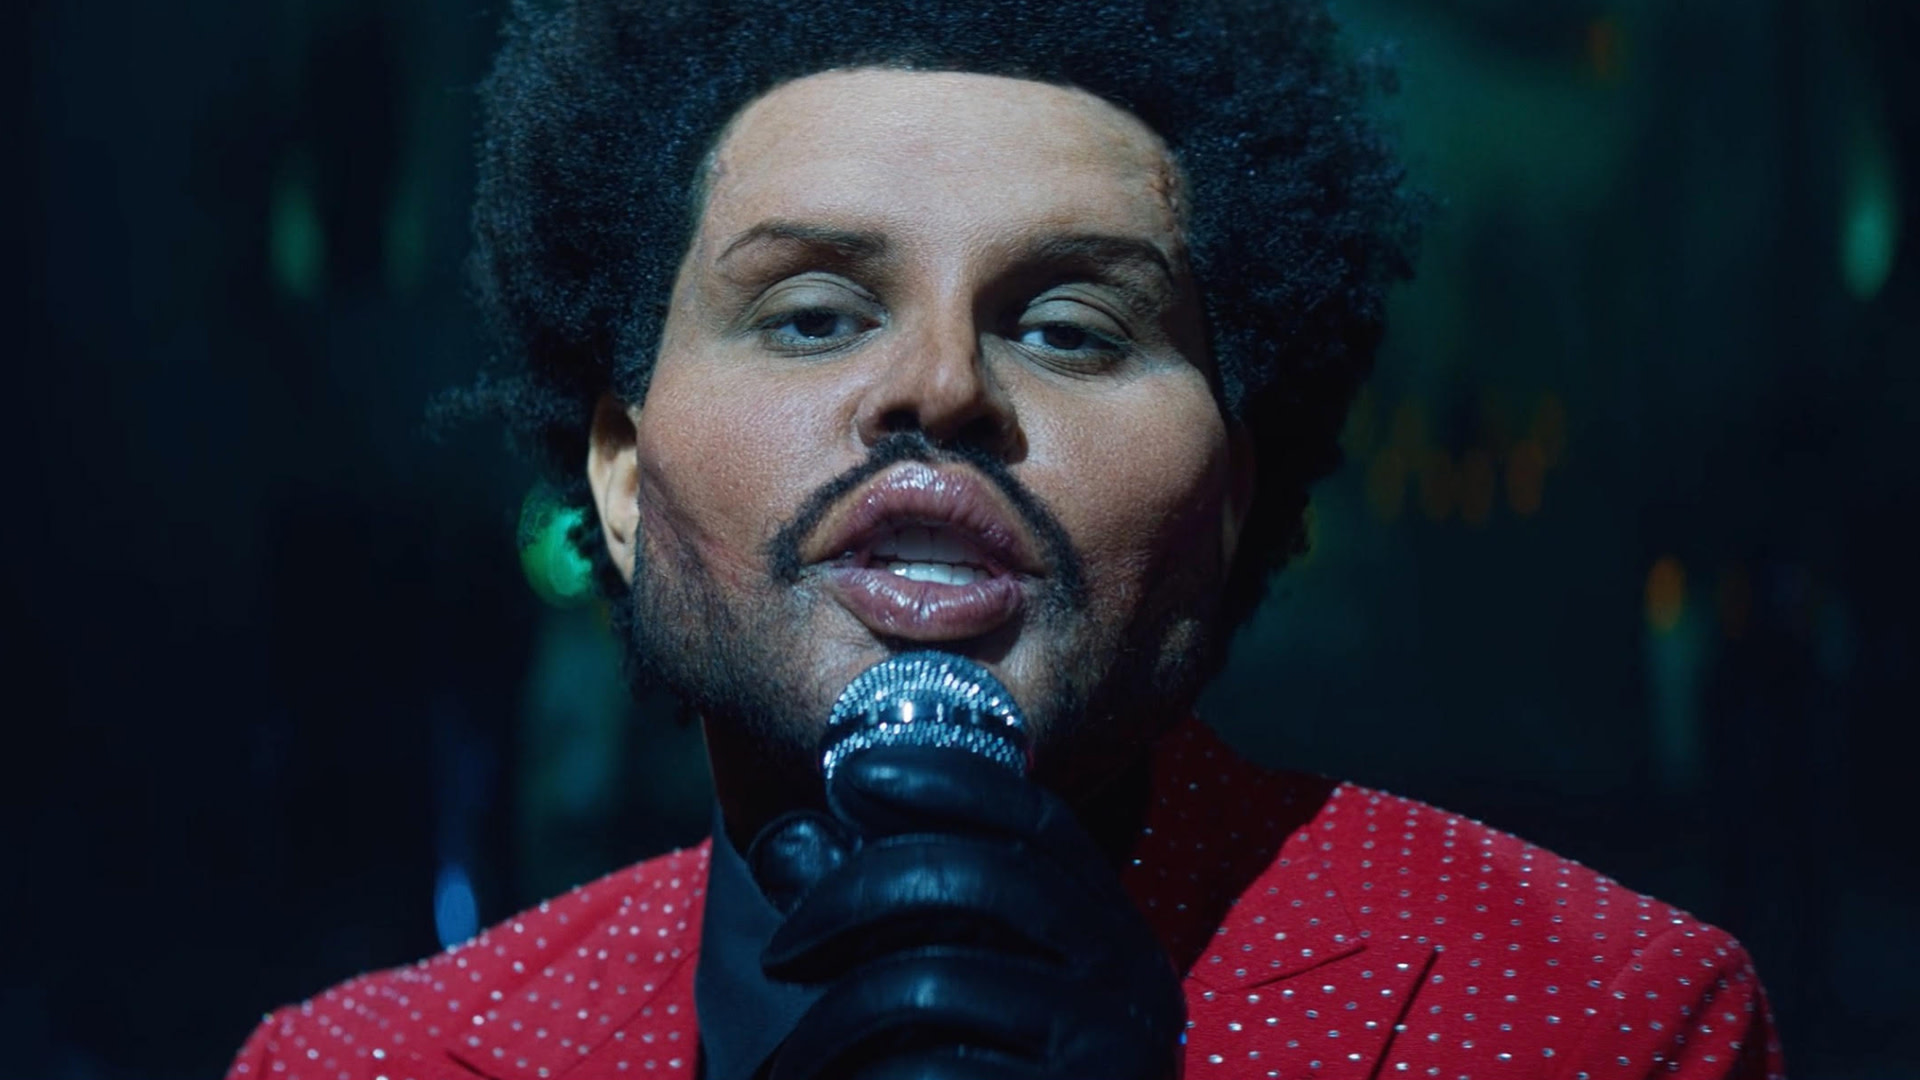 Watch The Weeknd's “Save Your Tears” Video